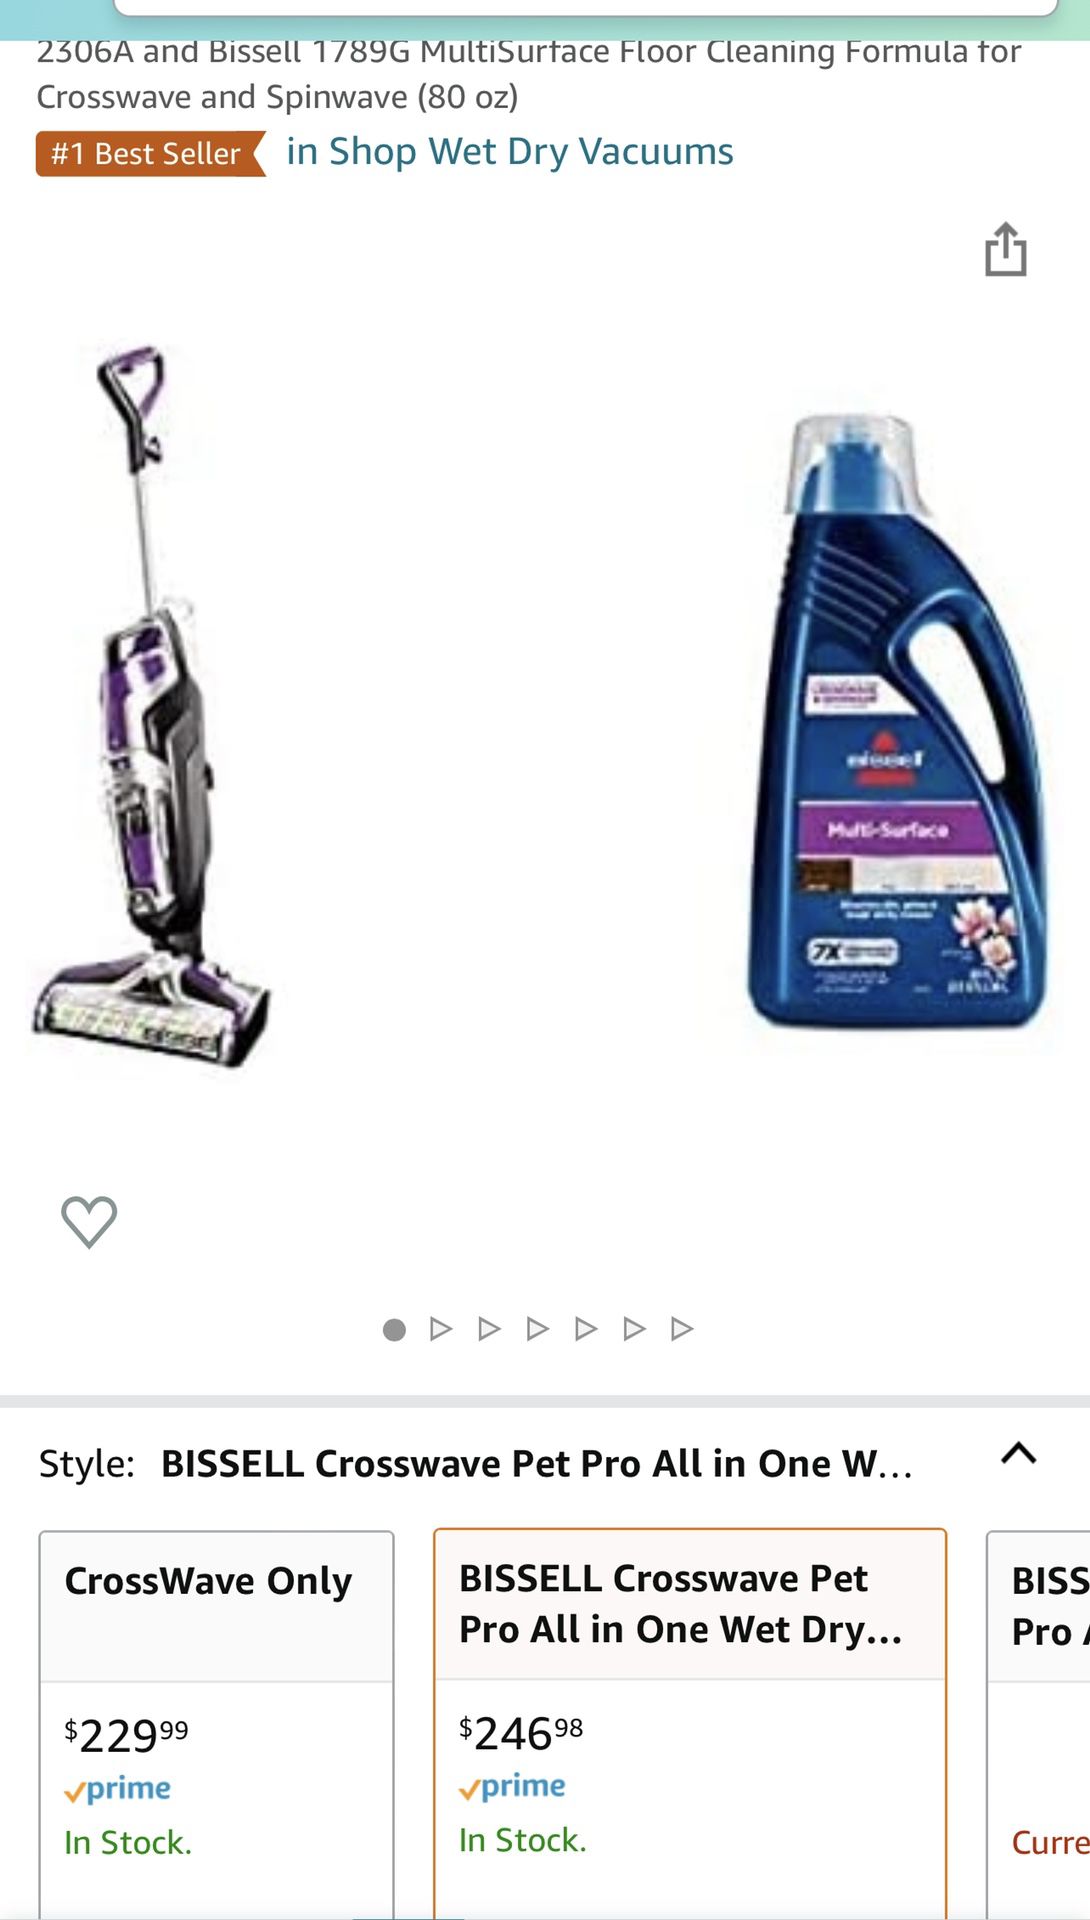 Bissell Crosswave Pet Pro All in One Wet Dry Vacuum Cleaner